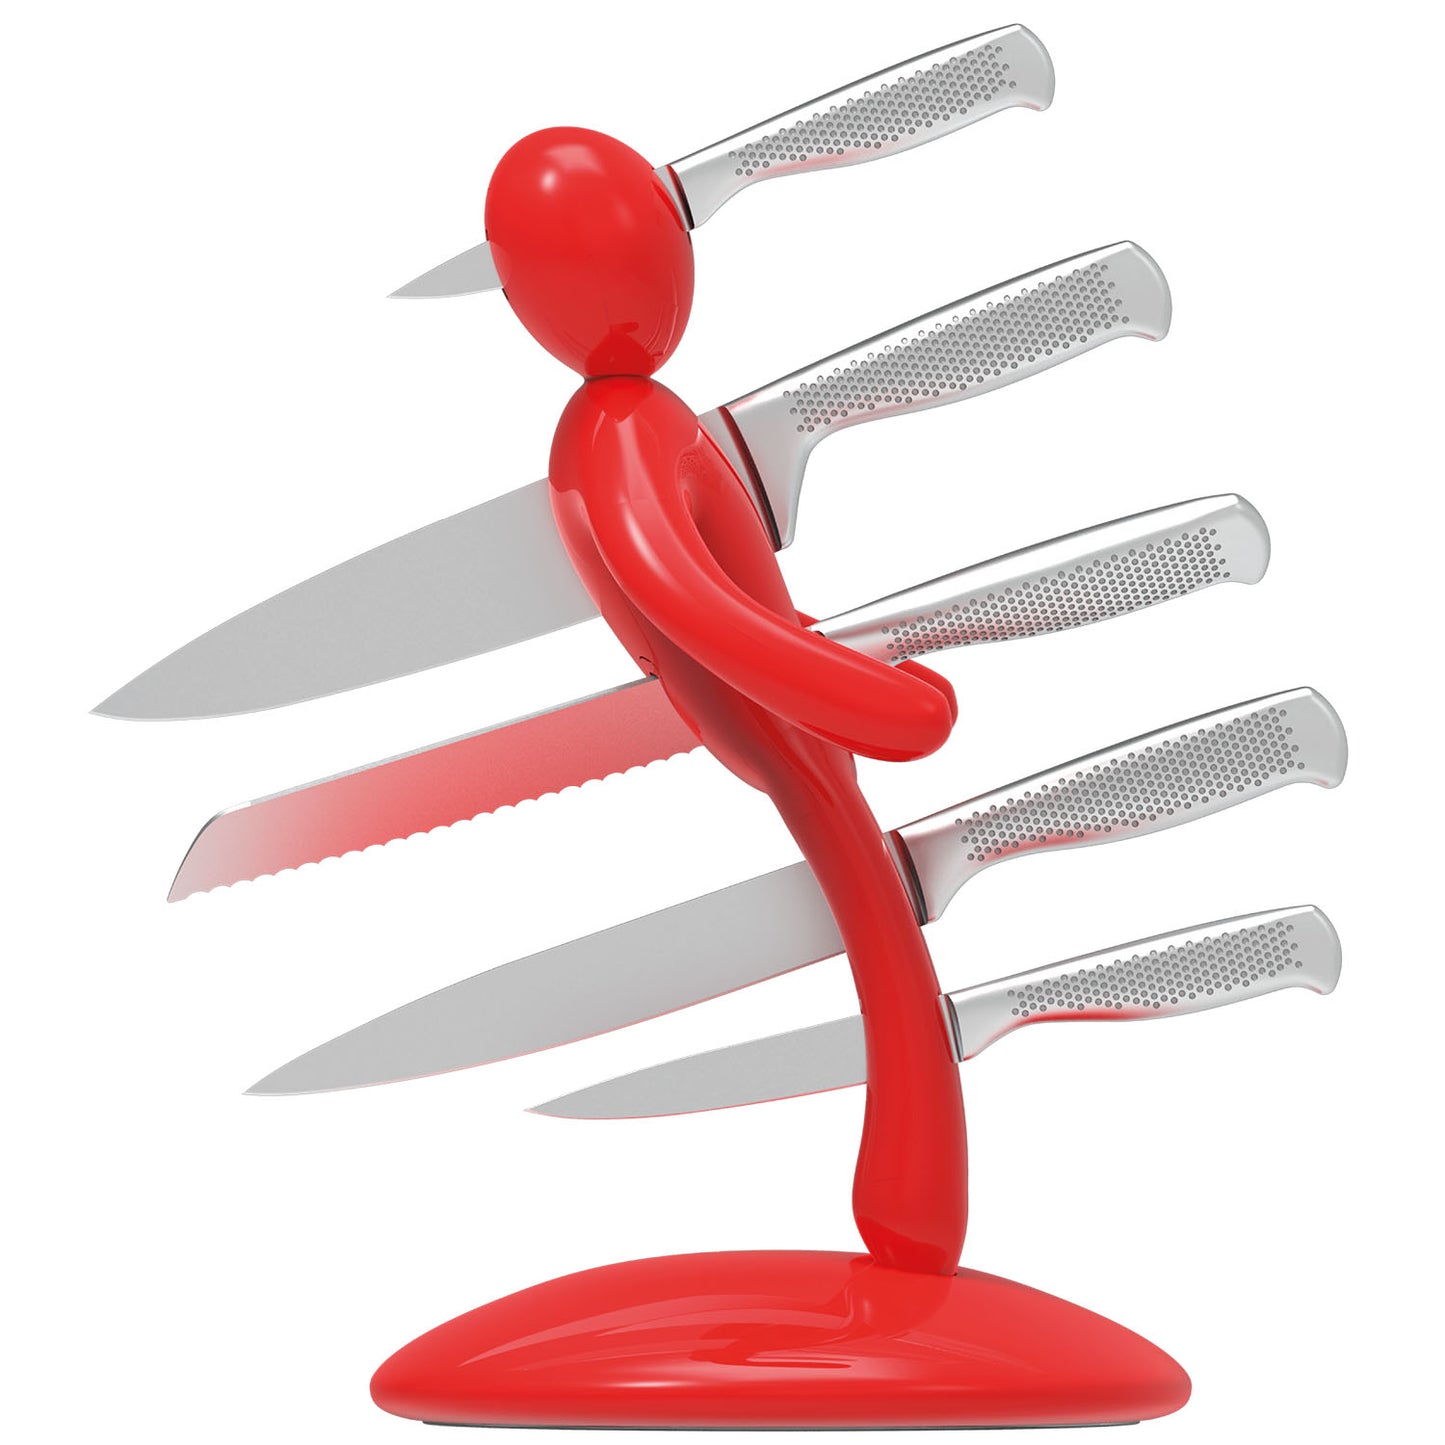 Voodoo/TheEx "Classic Edition" Knife Set - Red Plastic Holder (without sheaths)